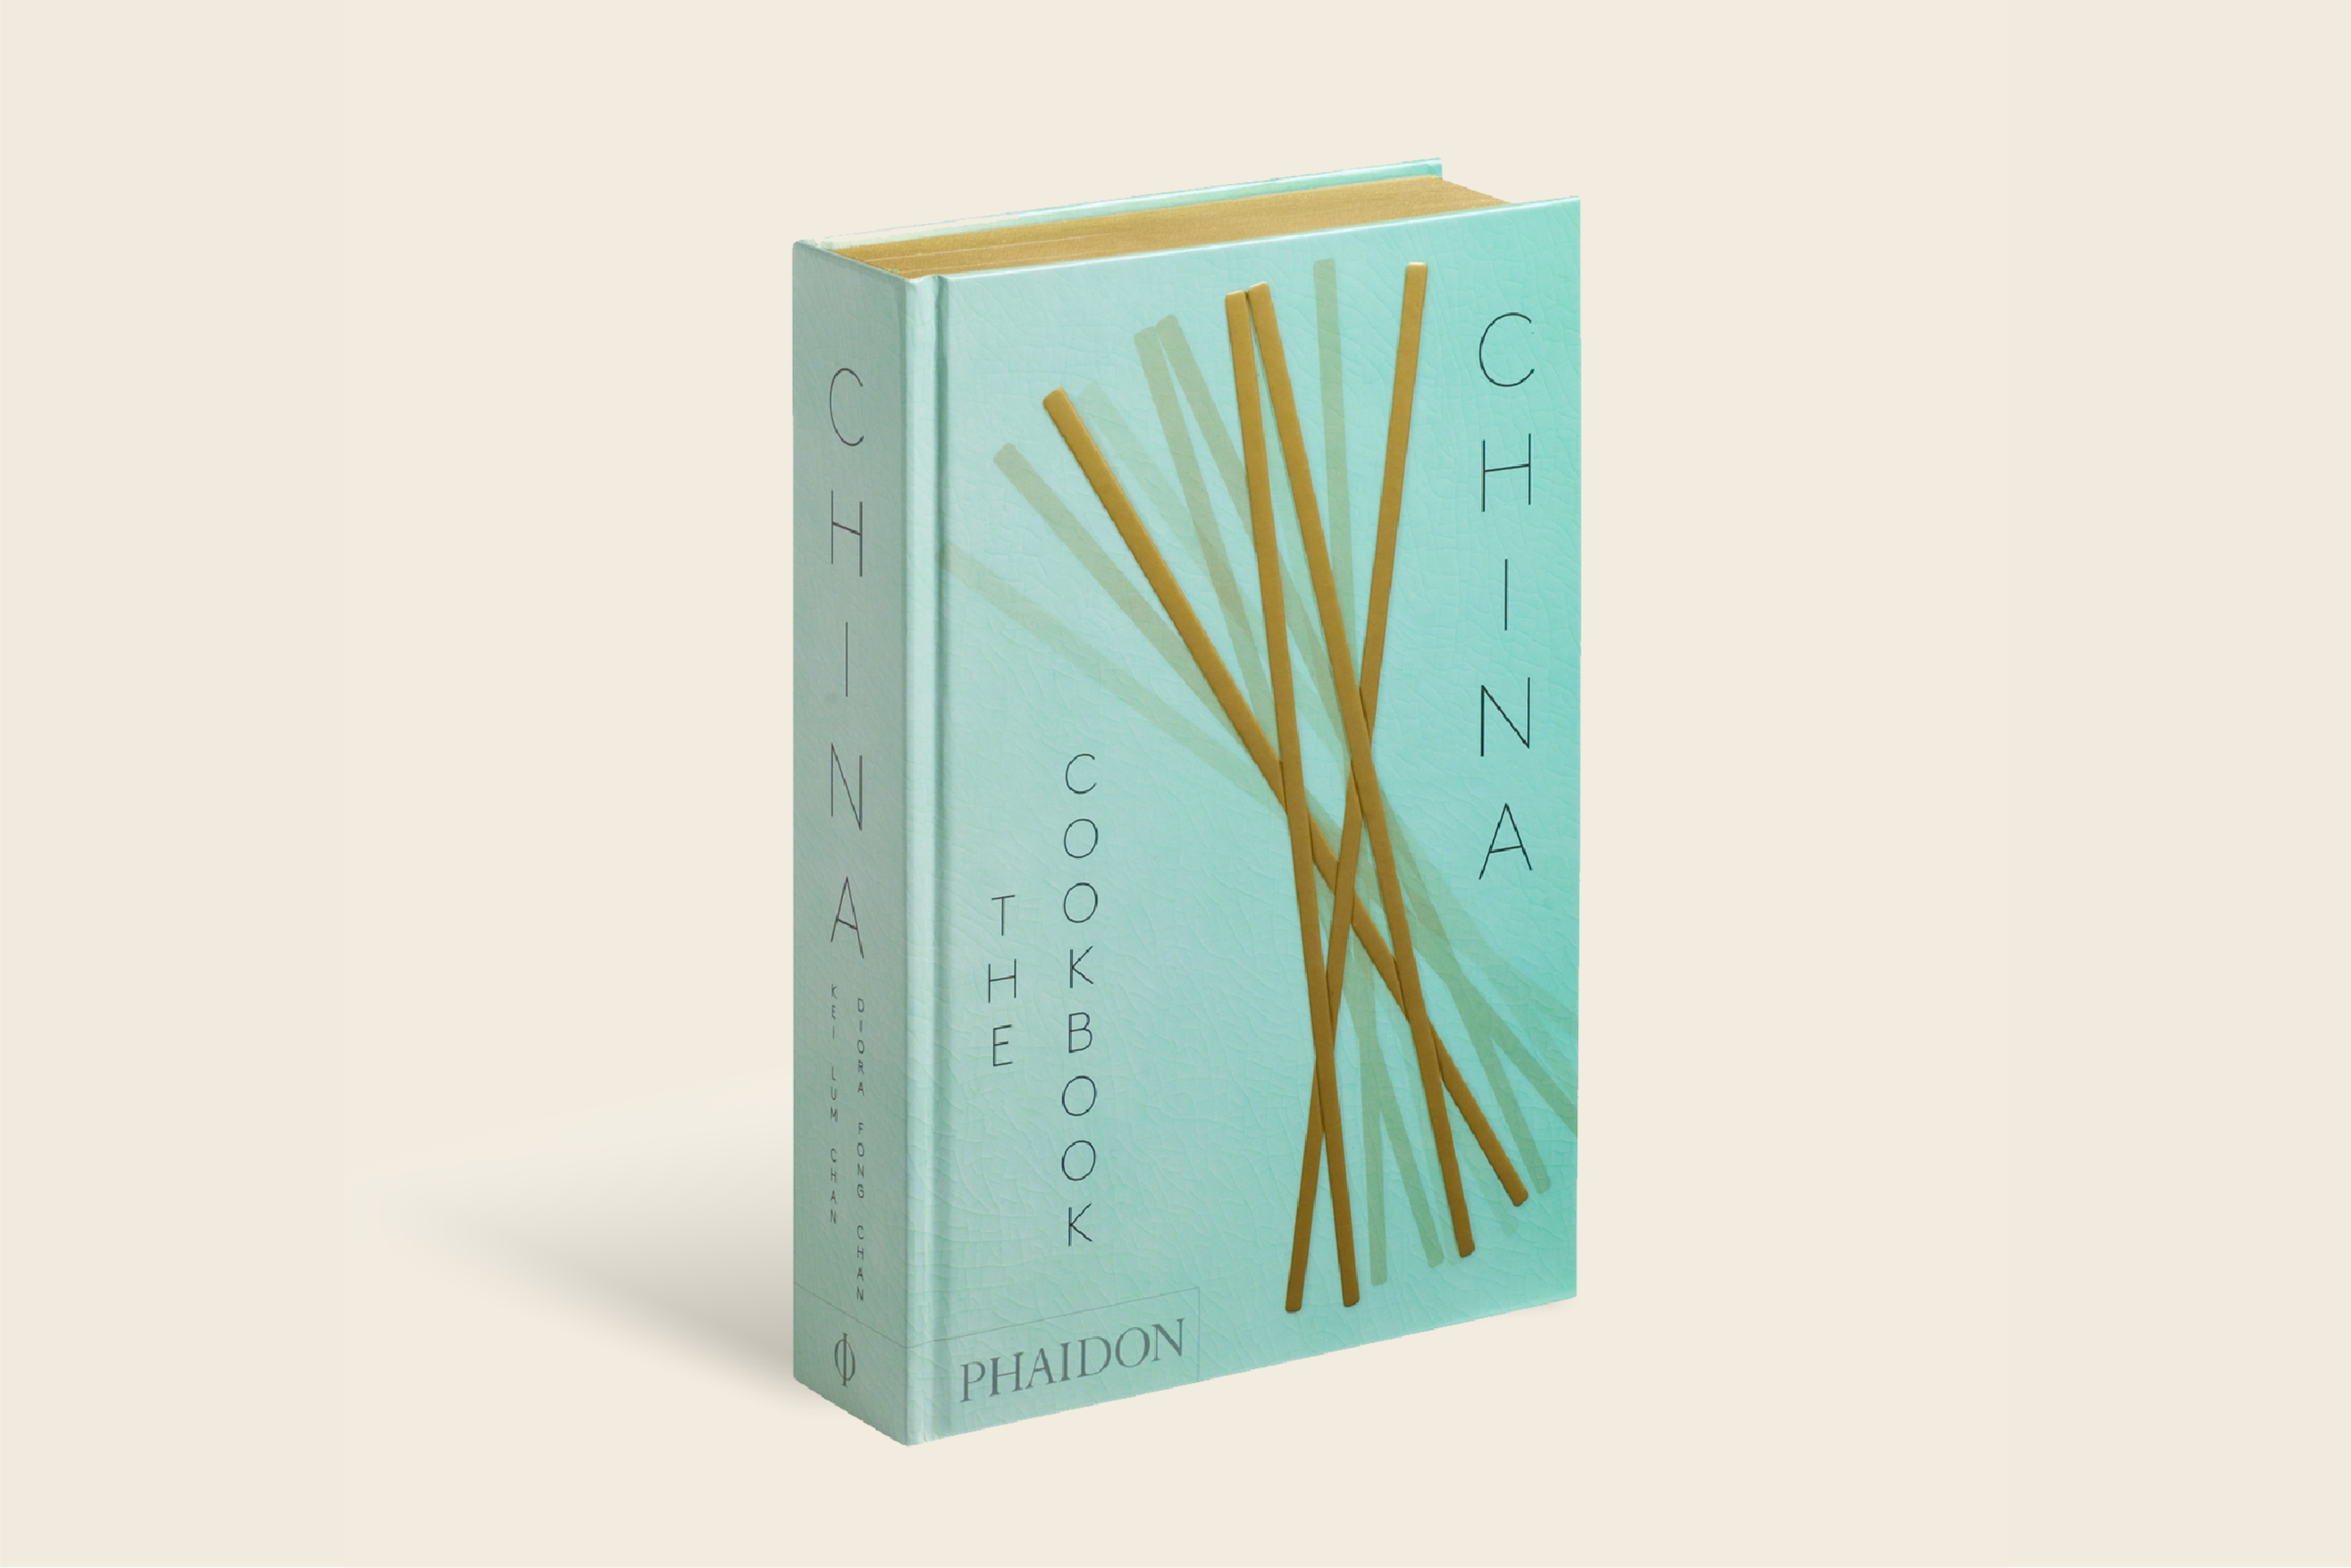 China: The Cookbook from Phaidon